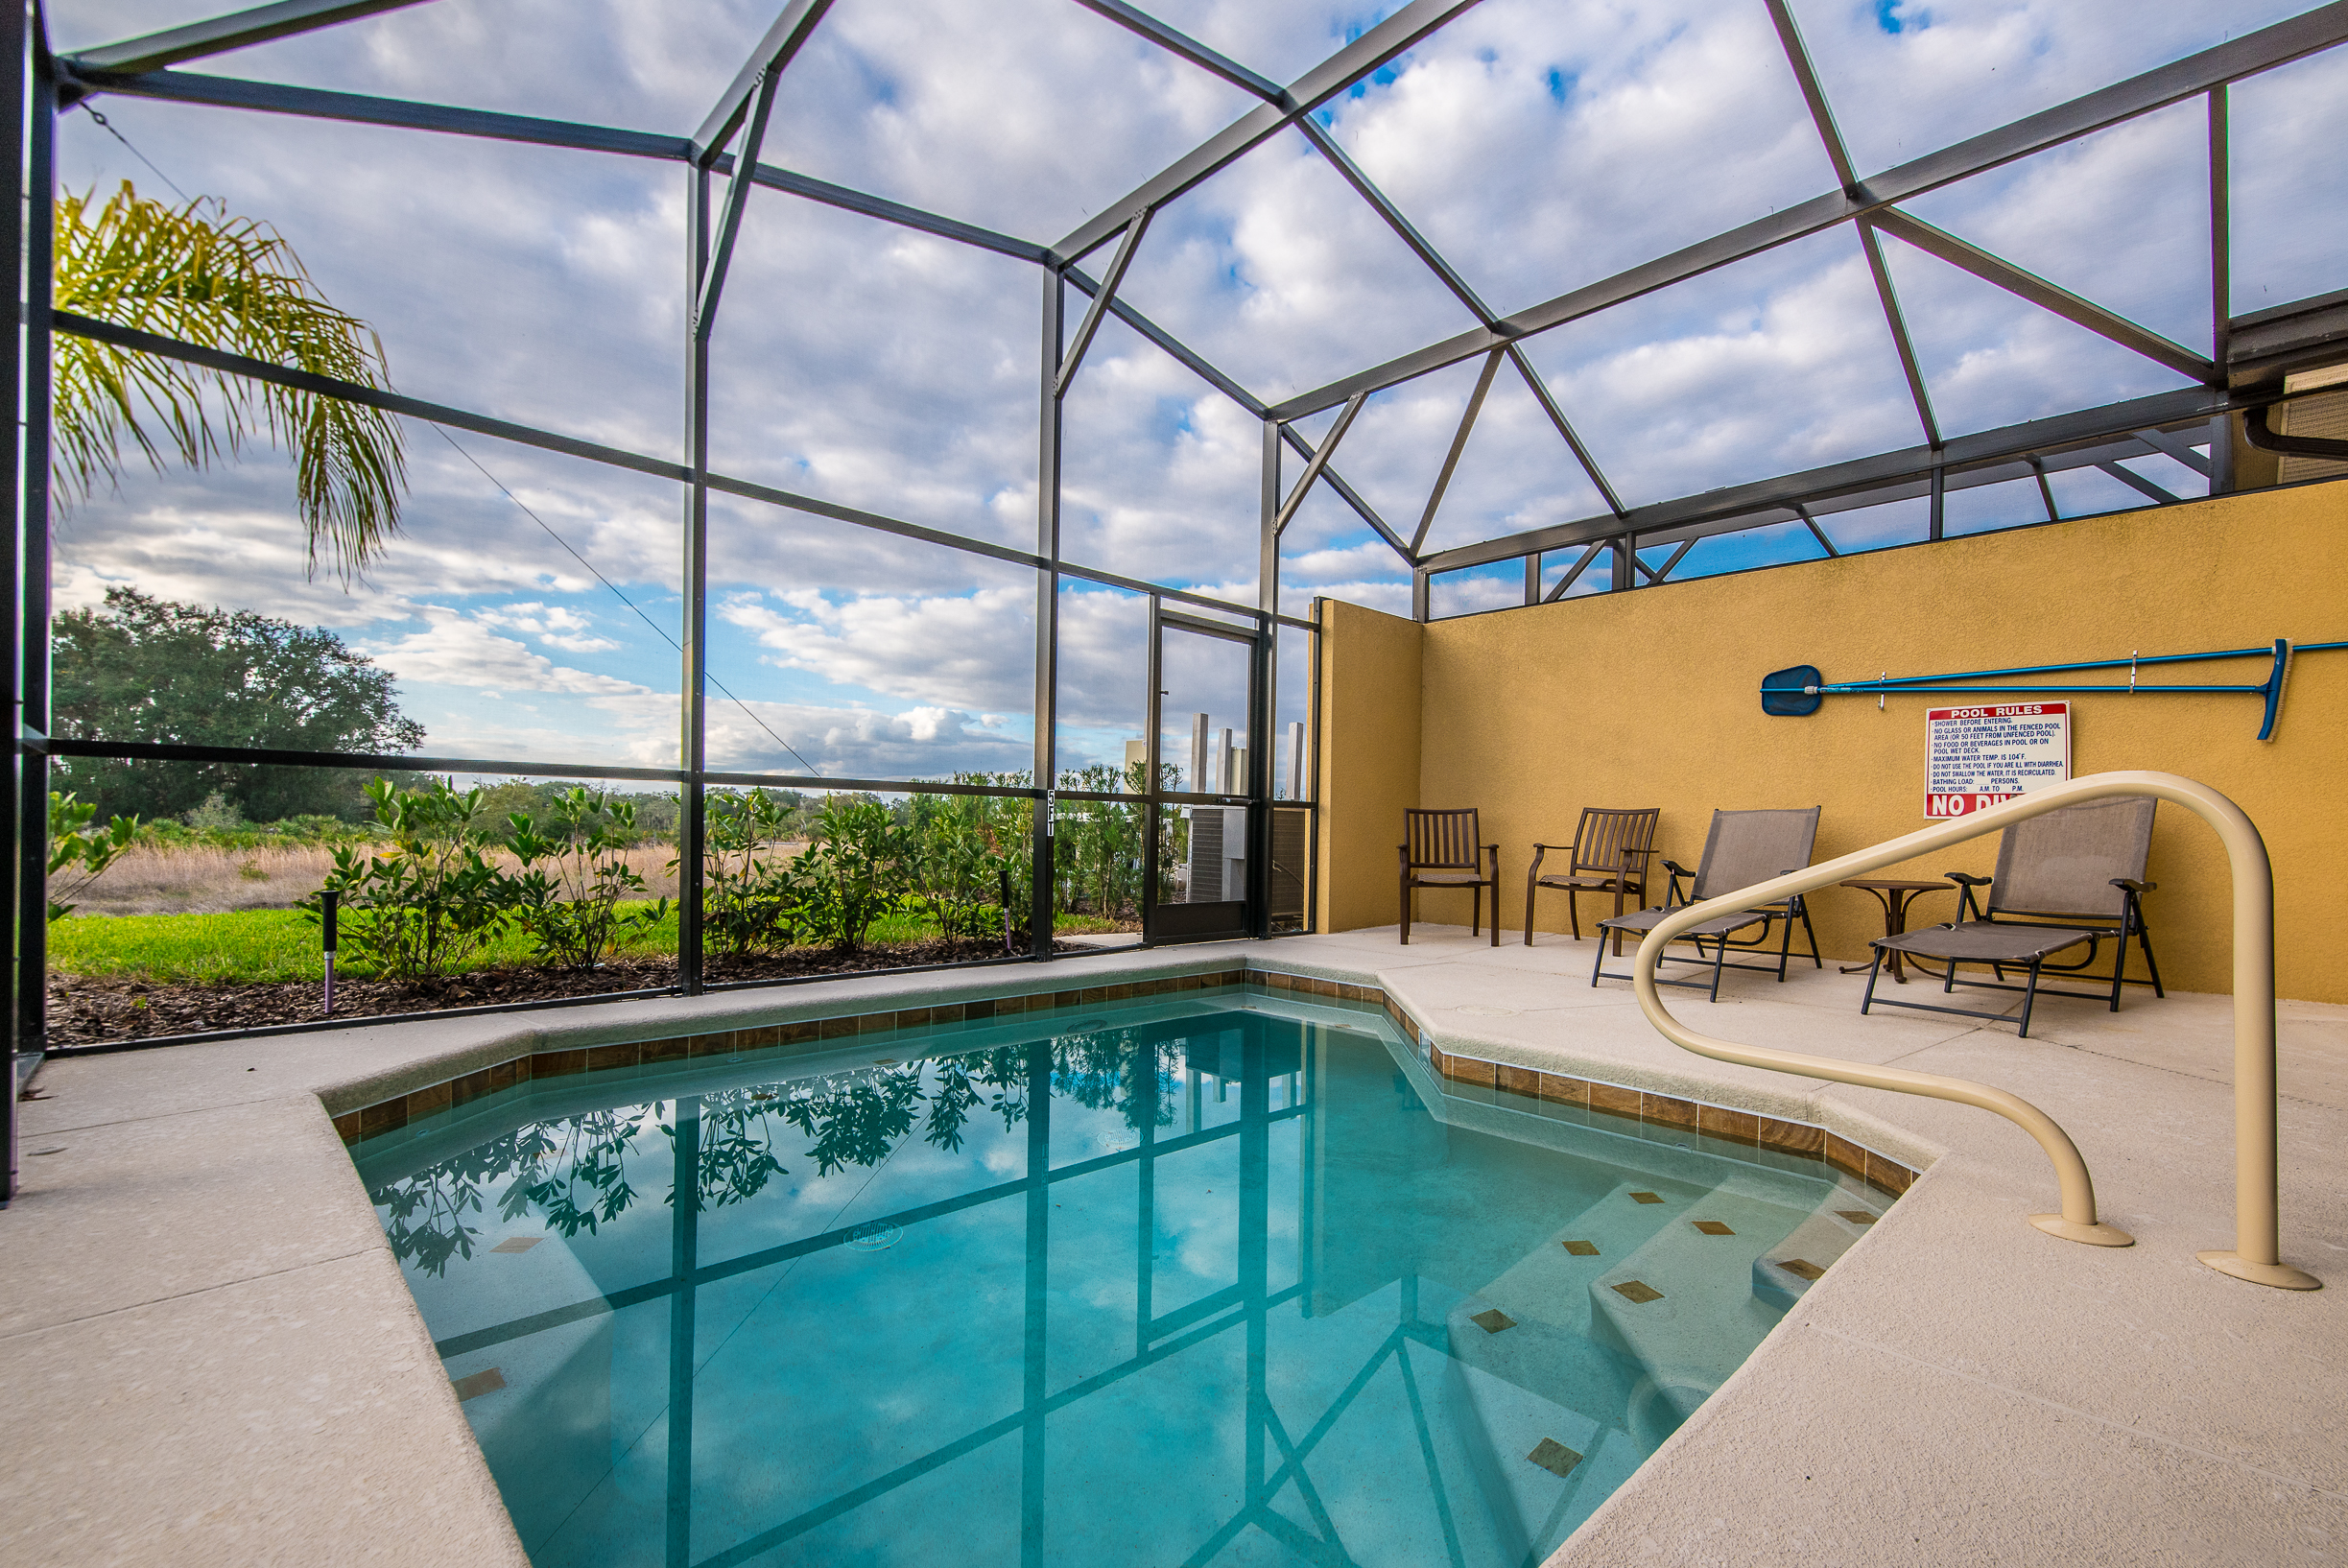 Welcoming private pool of the townhouse in Davenport Florida - Lounge chairs for you to relax - Glistening waters inviting you to take a refreshing swim - A tranquil setting where you can unwind and soak up the beauty of your surroundings